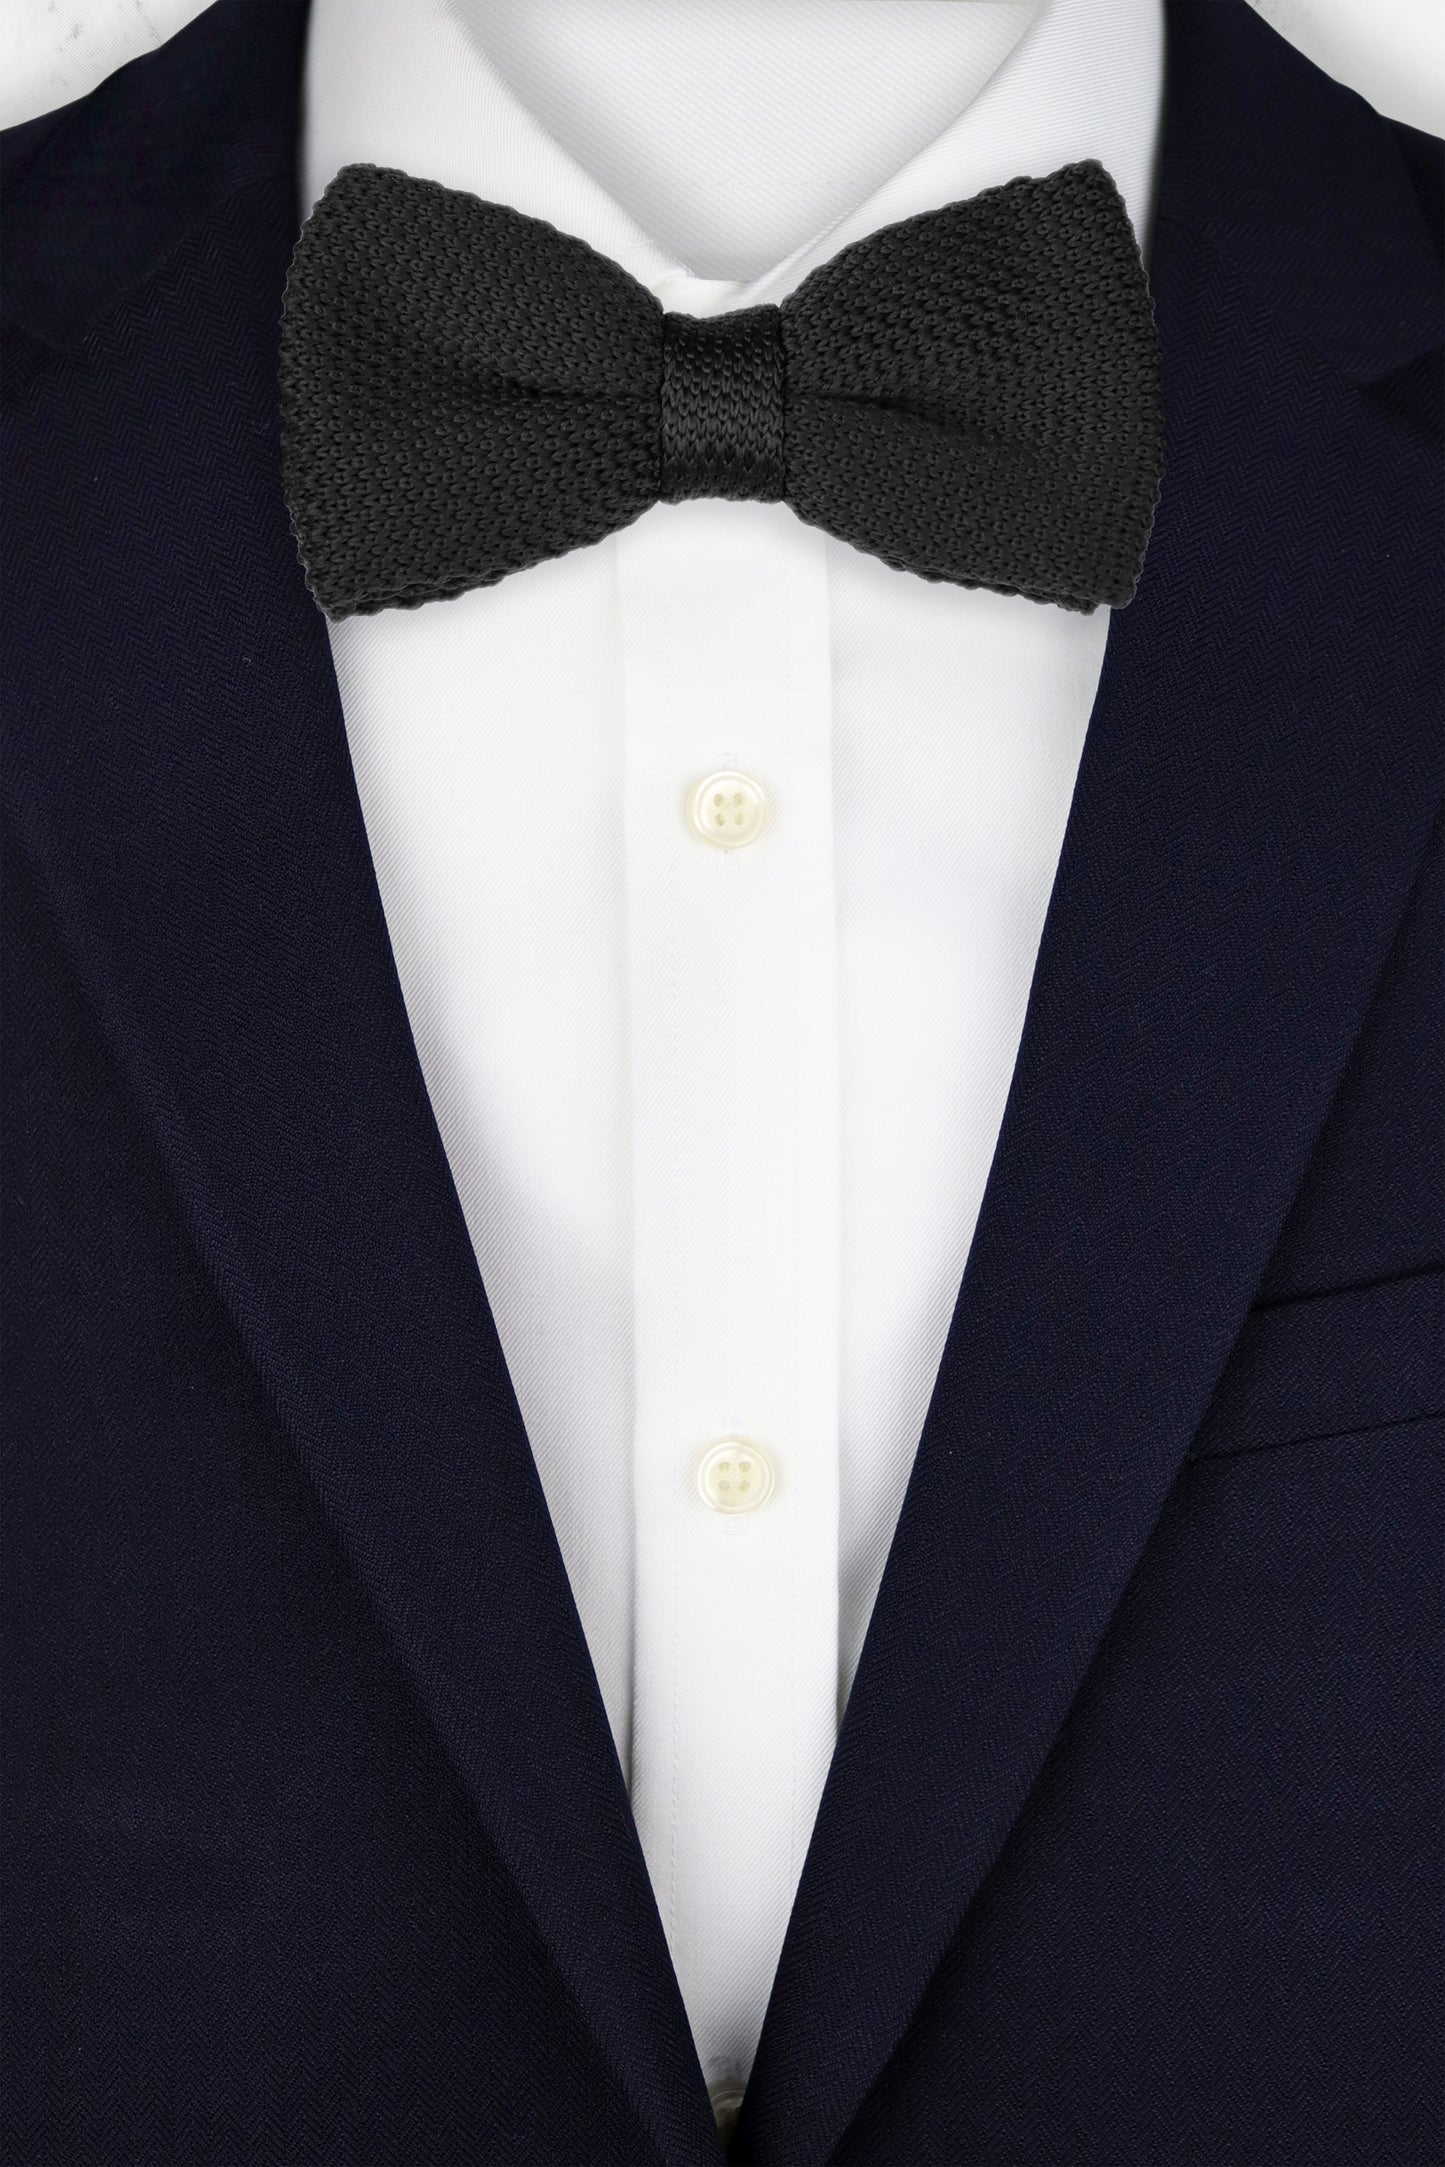 100% Polyester Knitted Bow Tie - Black